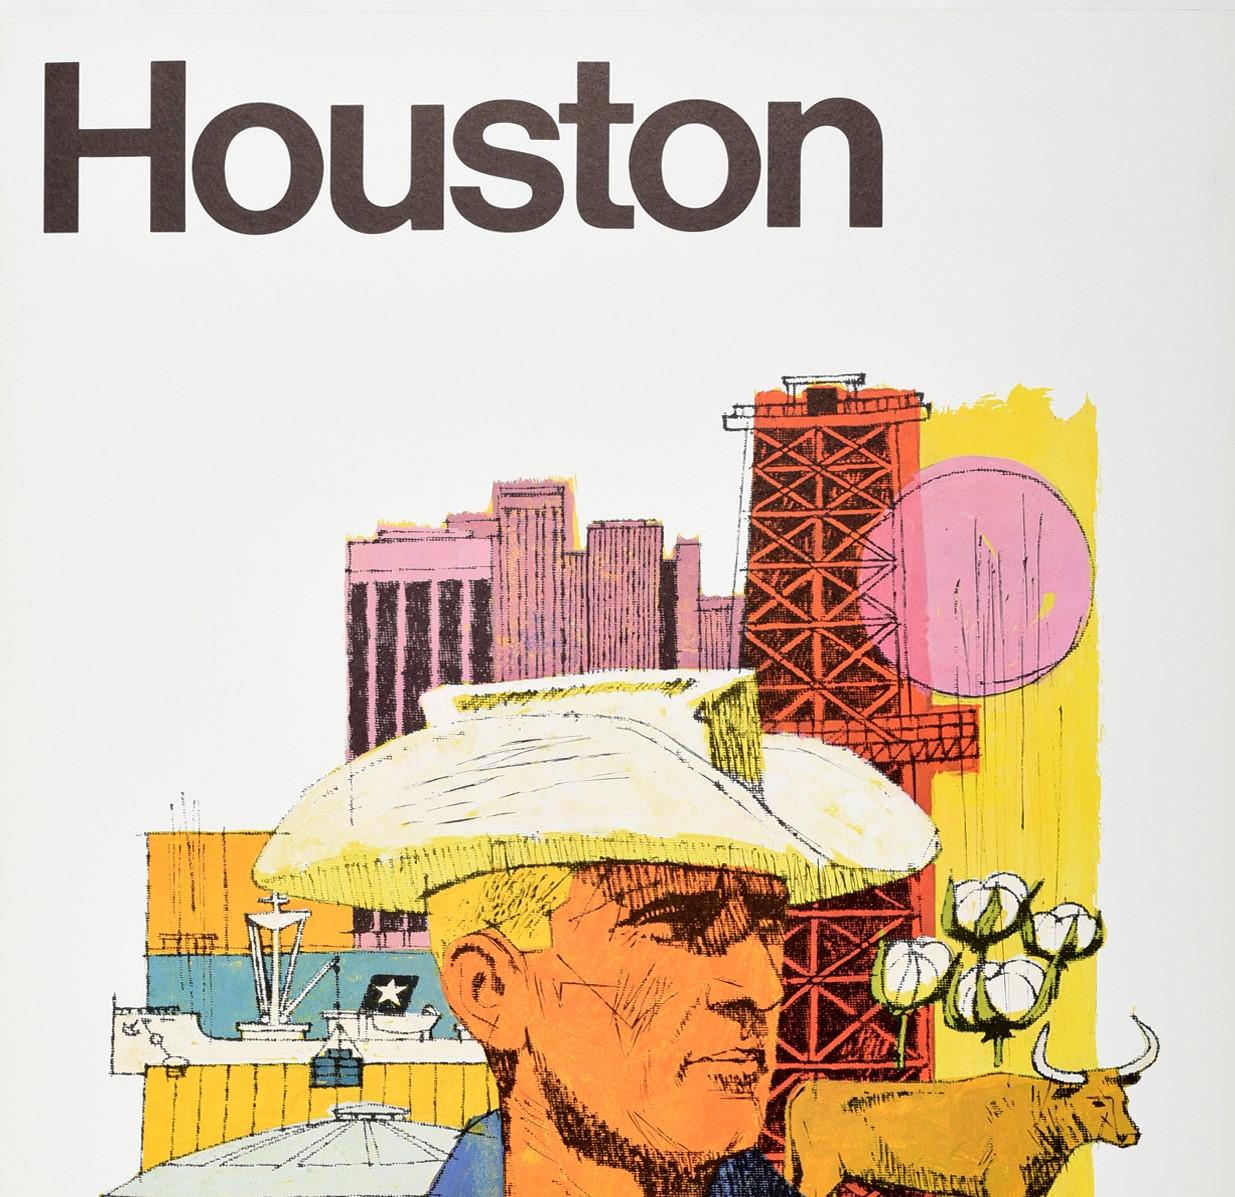 Original vintage travel poster - Houston Continental the proud bird with the golden tail - featuring a great design with illustrations of a man wearing a hat in front of a bull and a cotton farm, an oil rig, the Astrodome sports stadium (opened